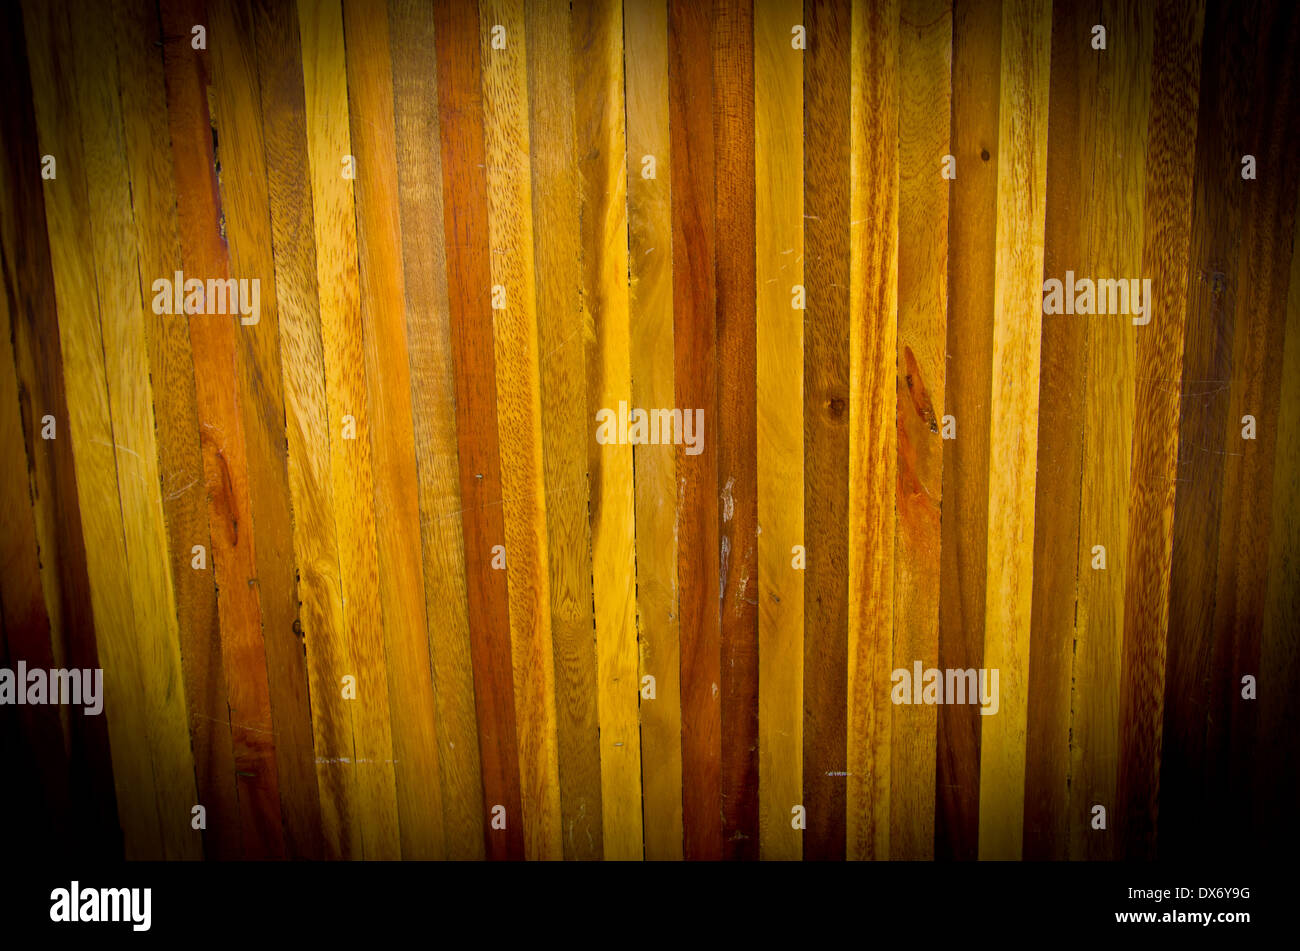 brown wood texture background Stock Photo